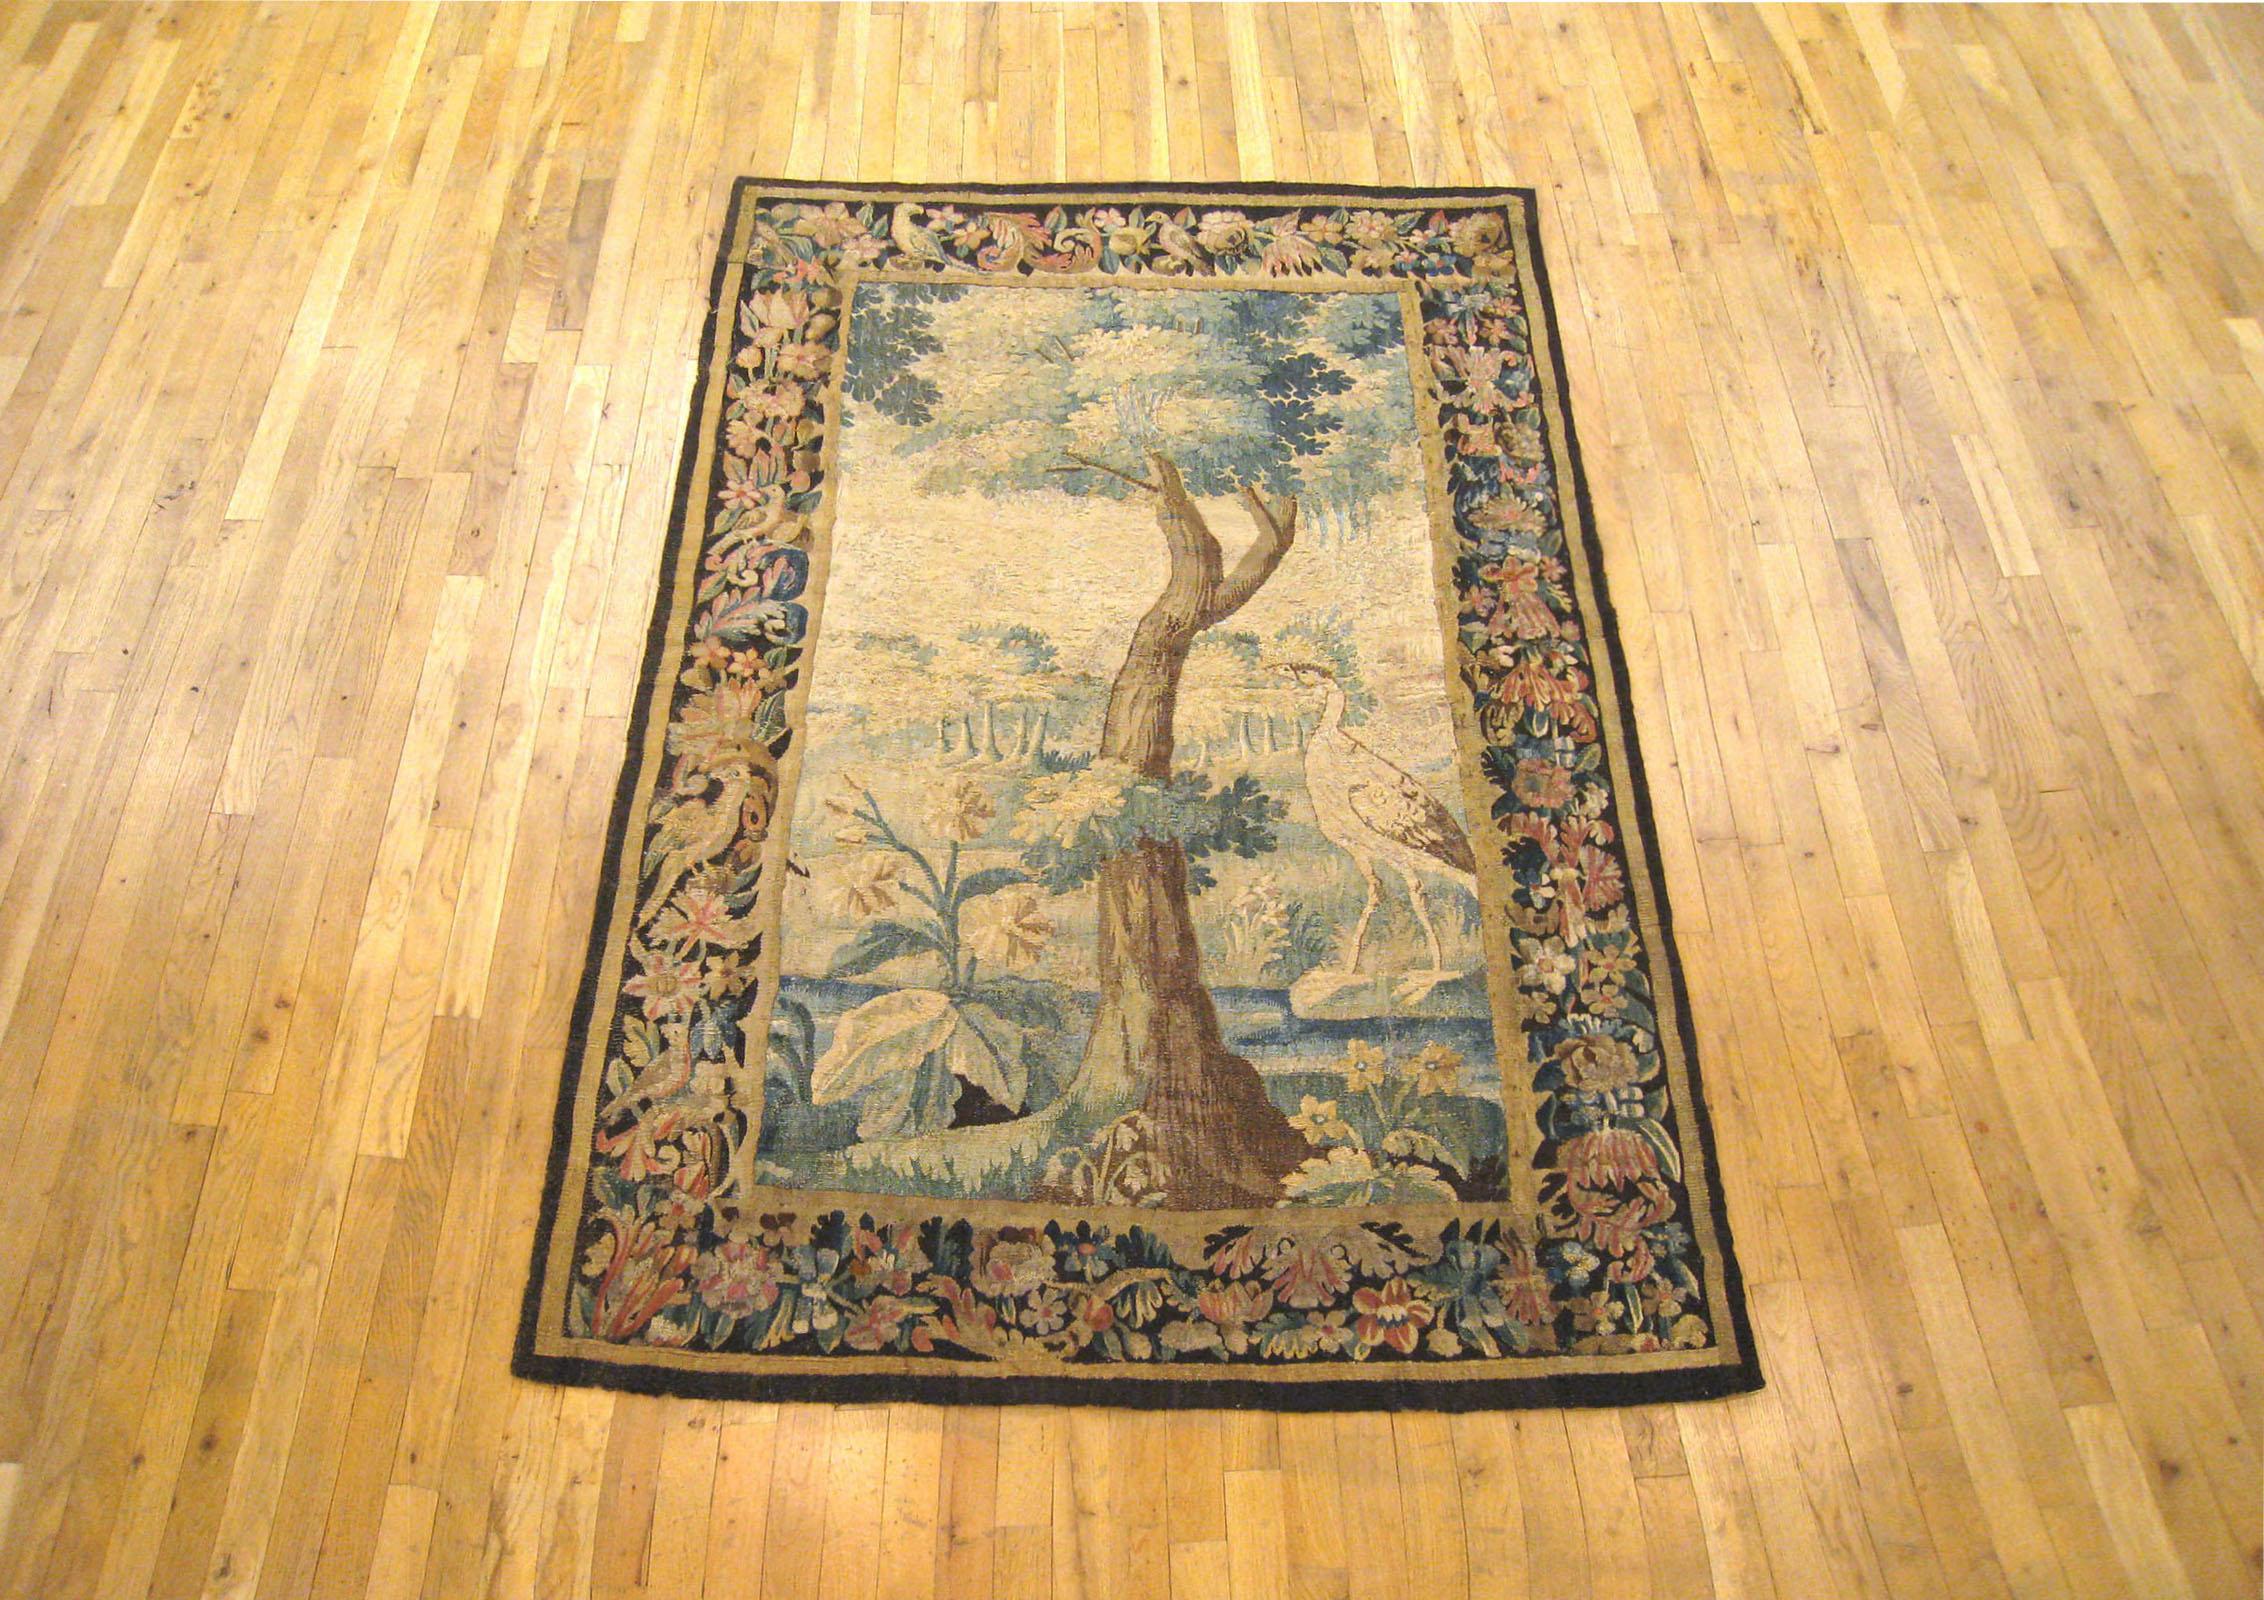 An antique Flemish verdure landscape tapestry panel from the 18th century, envisioning an idyllic setting with a stately tree and an exotic bird in the midst of verdant foliage. A tranquil scene in the tradition of the verdure tapestry, coming from